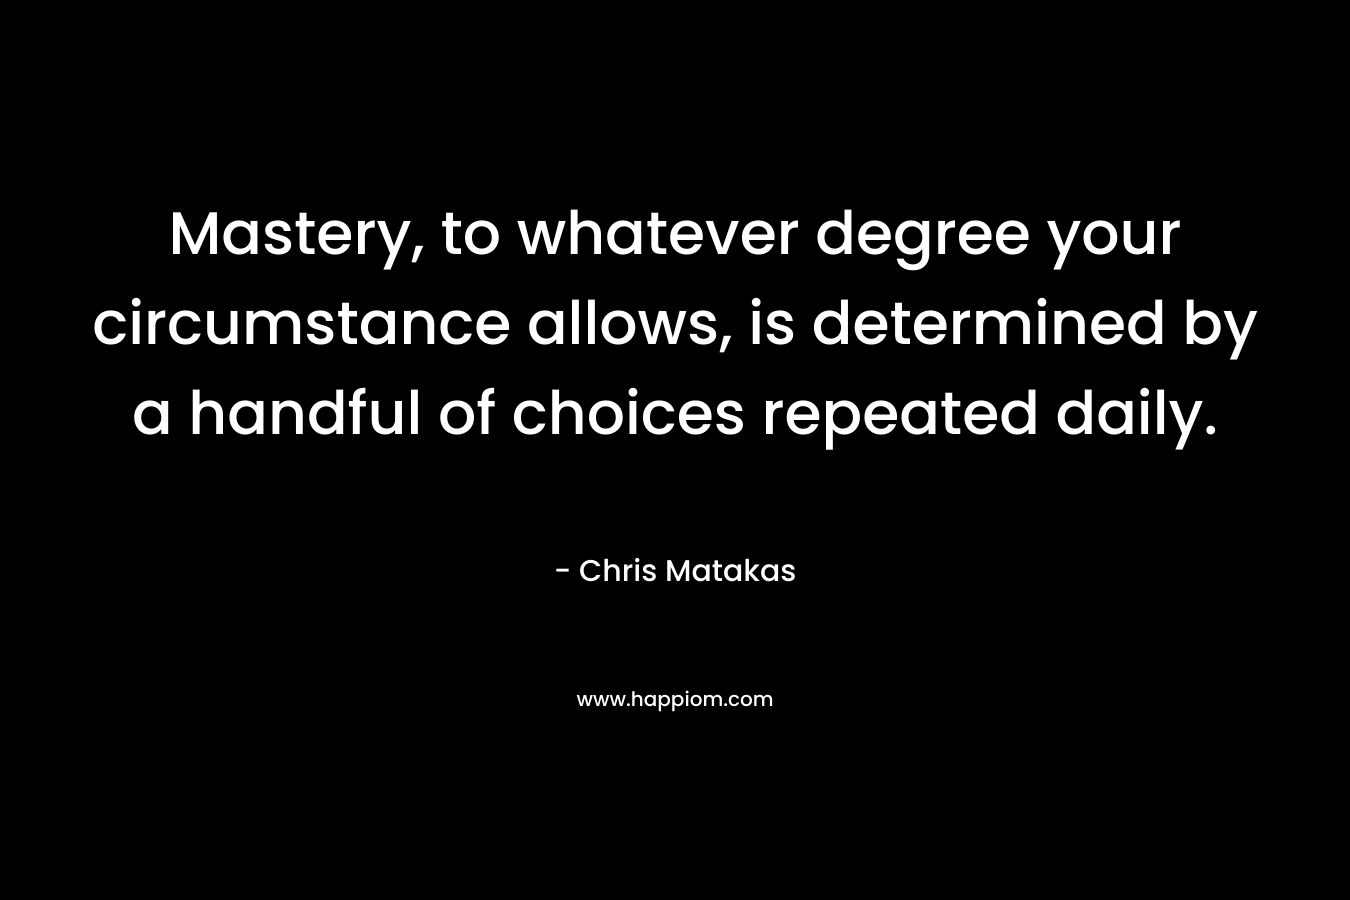 Mastery, to whatever degree your circumstance allows, is determined by a handful of choices repeated daily. – Chris Matakas